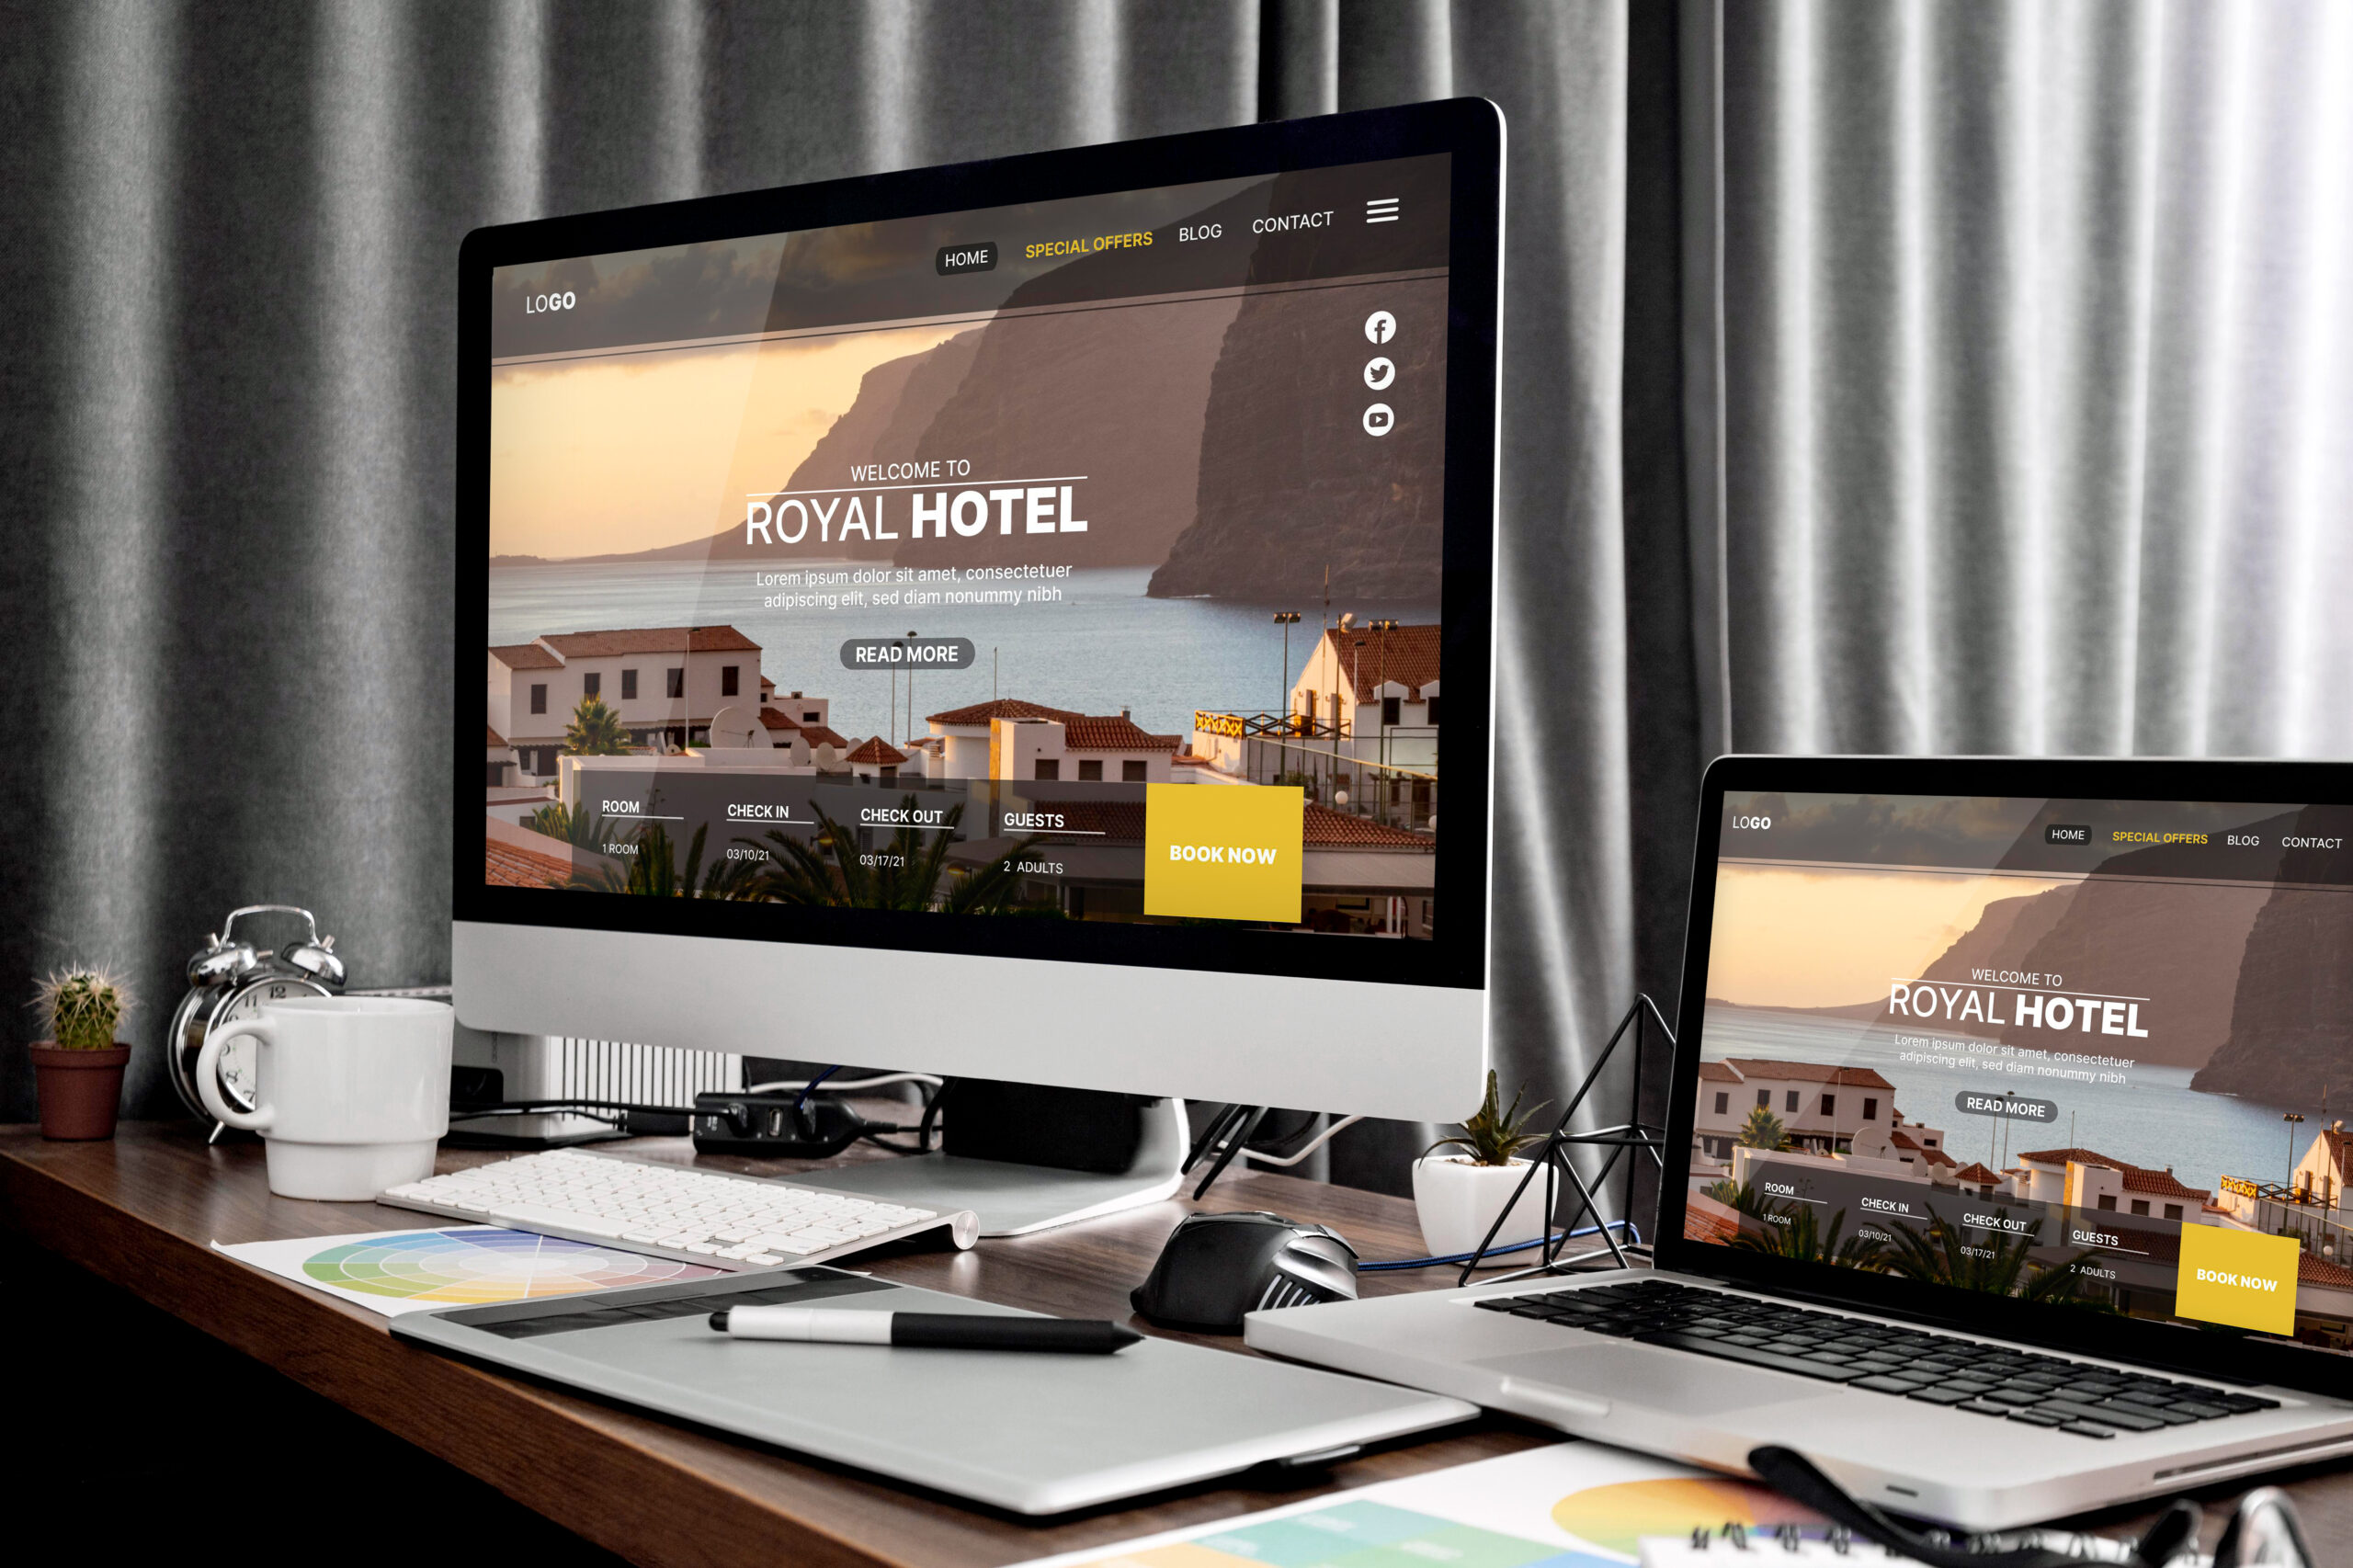 A desktop computer and a laptop displaying a hotel website with a booking interface, showcasing Weblook International's creative web design services in Sri Lanka.